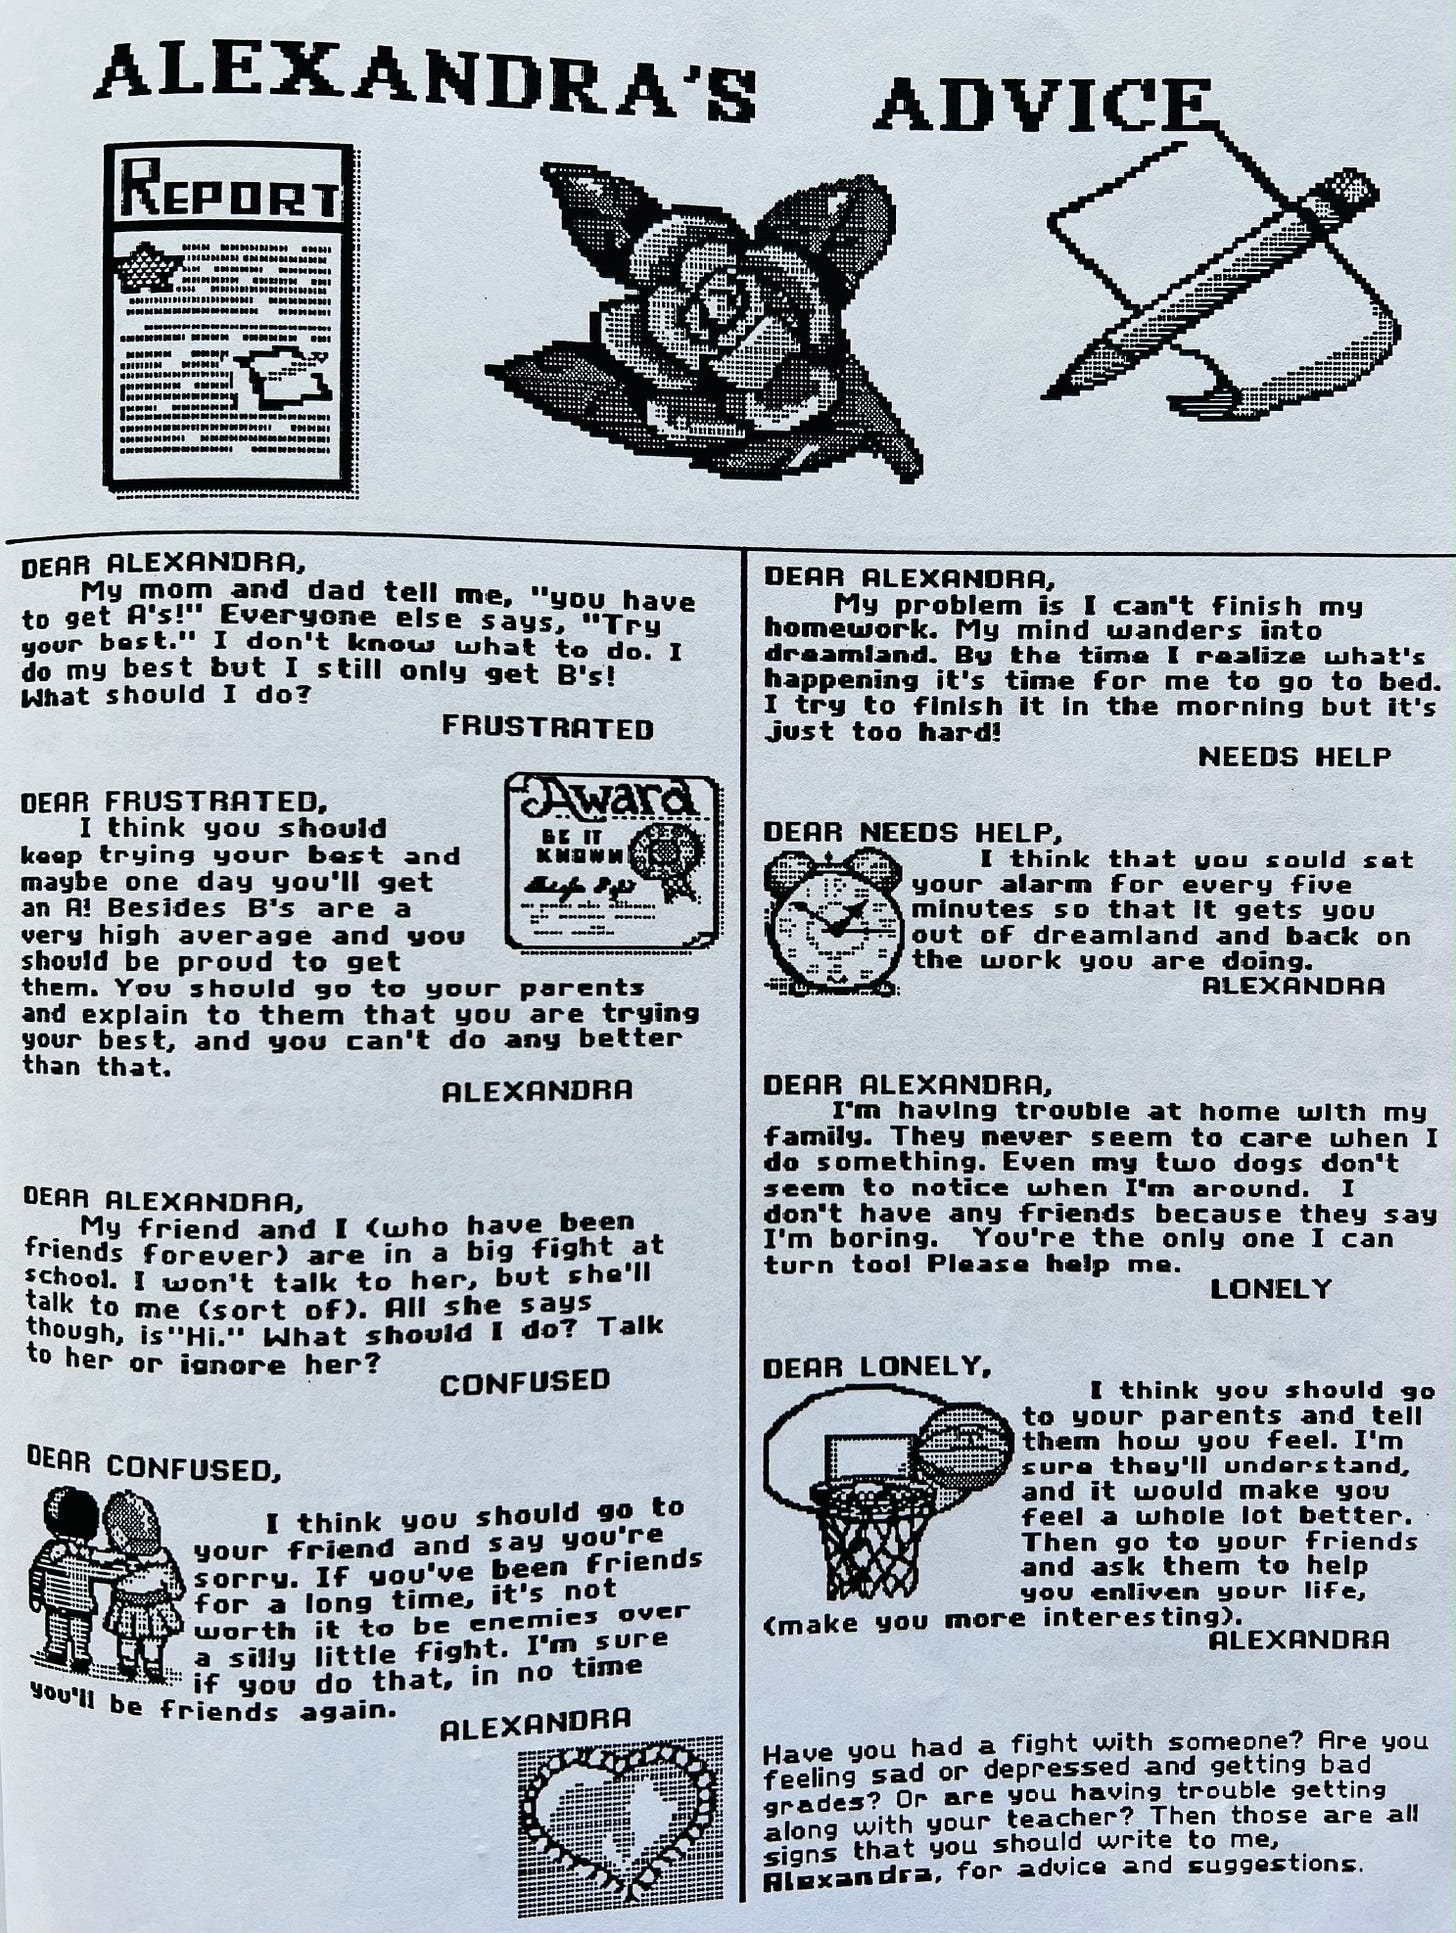 Photo from a 1991 school newspaper and the Alexandra's Advice page, where 12 year old Jen wrote advice to her (mostly fictional) classmates.